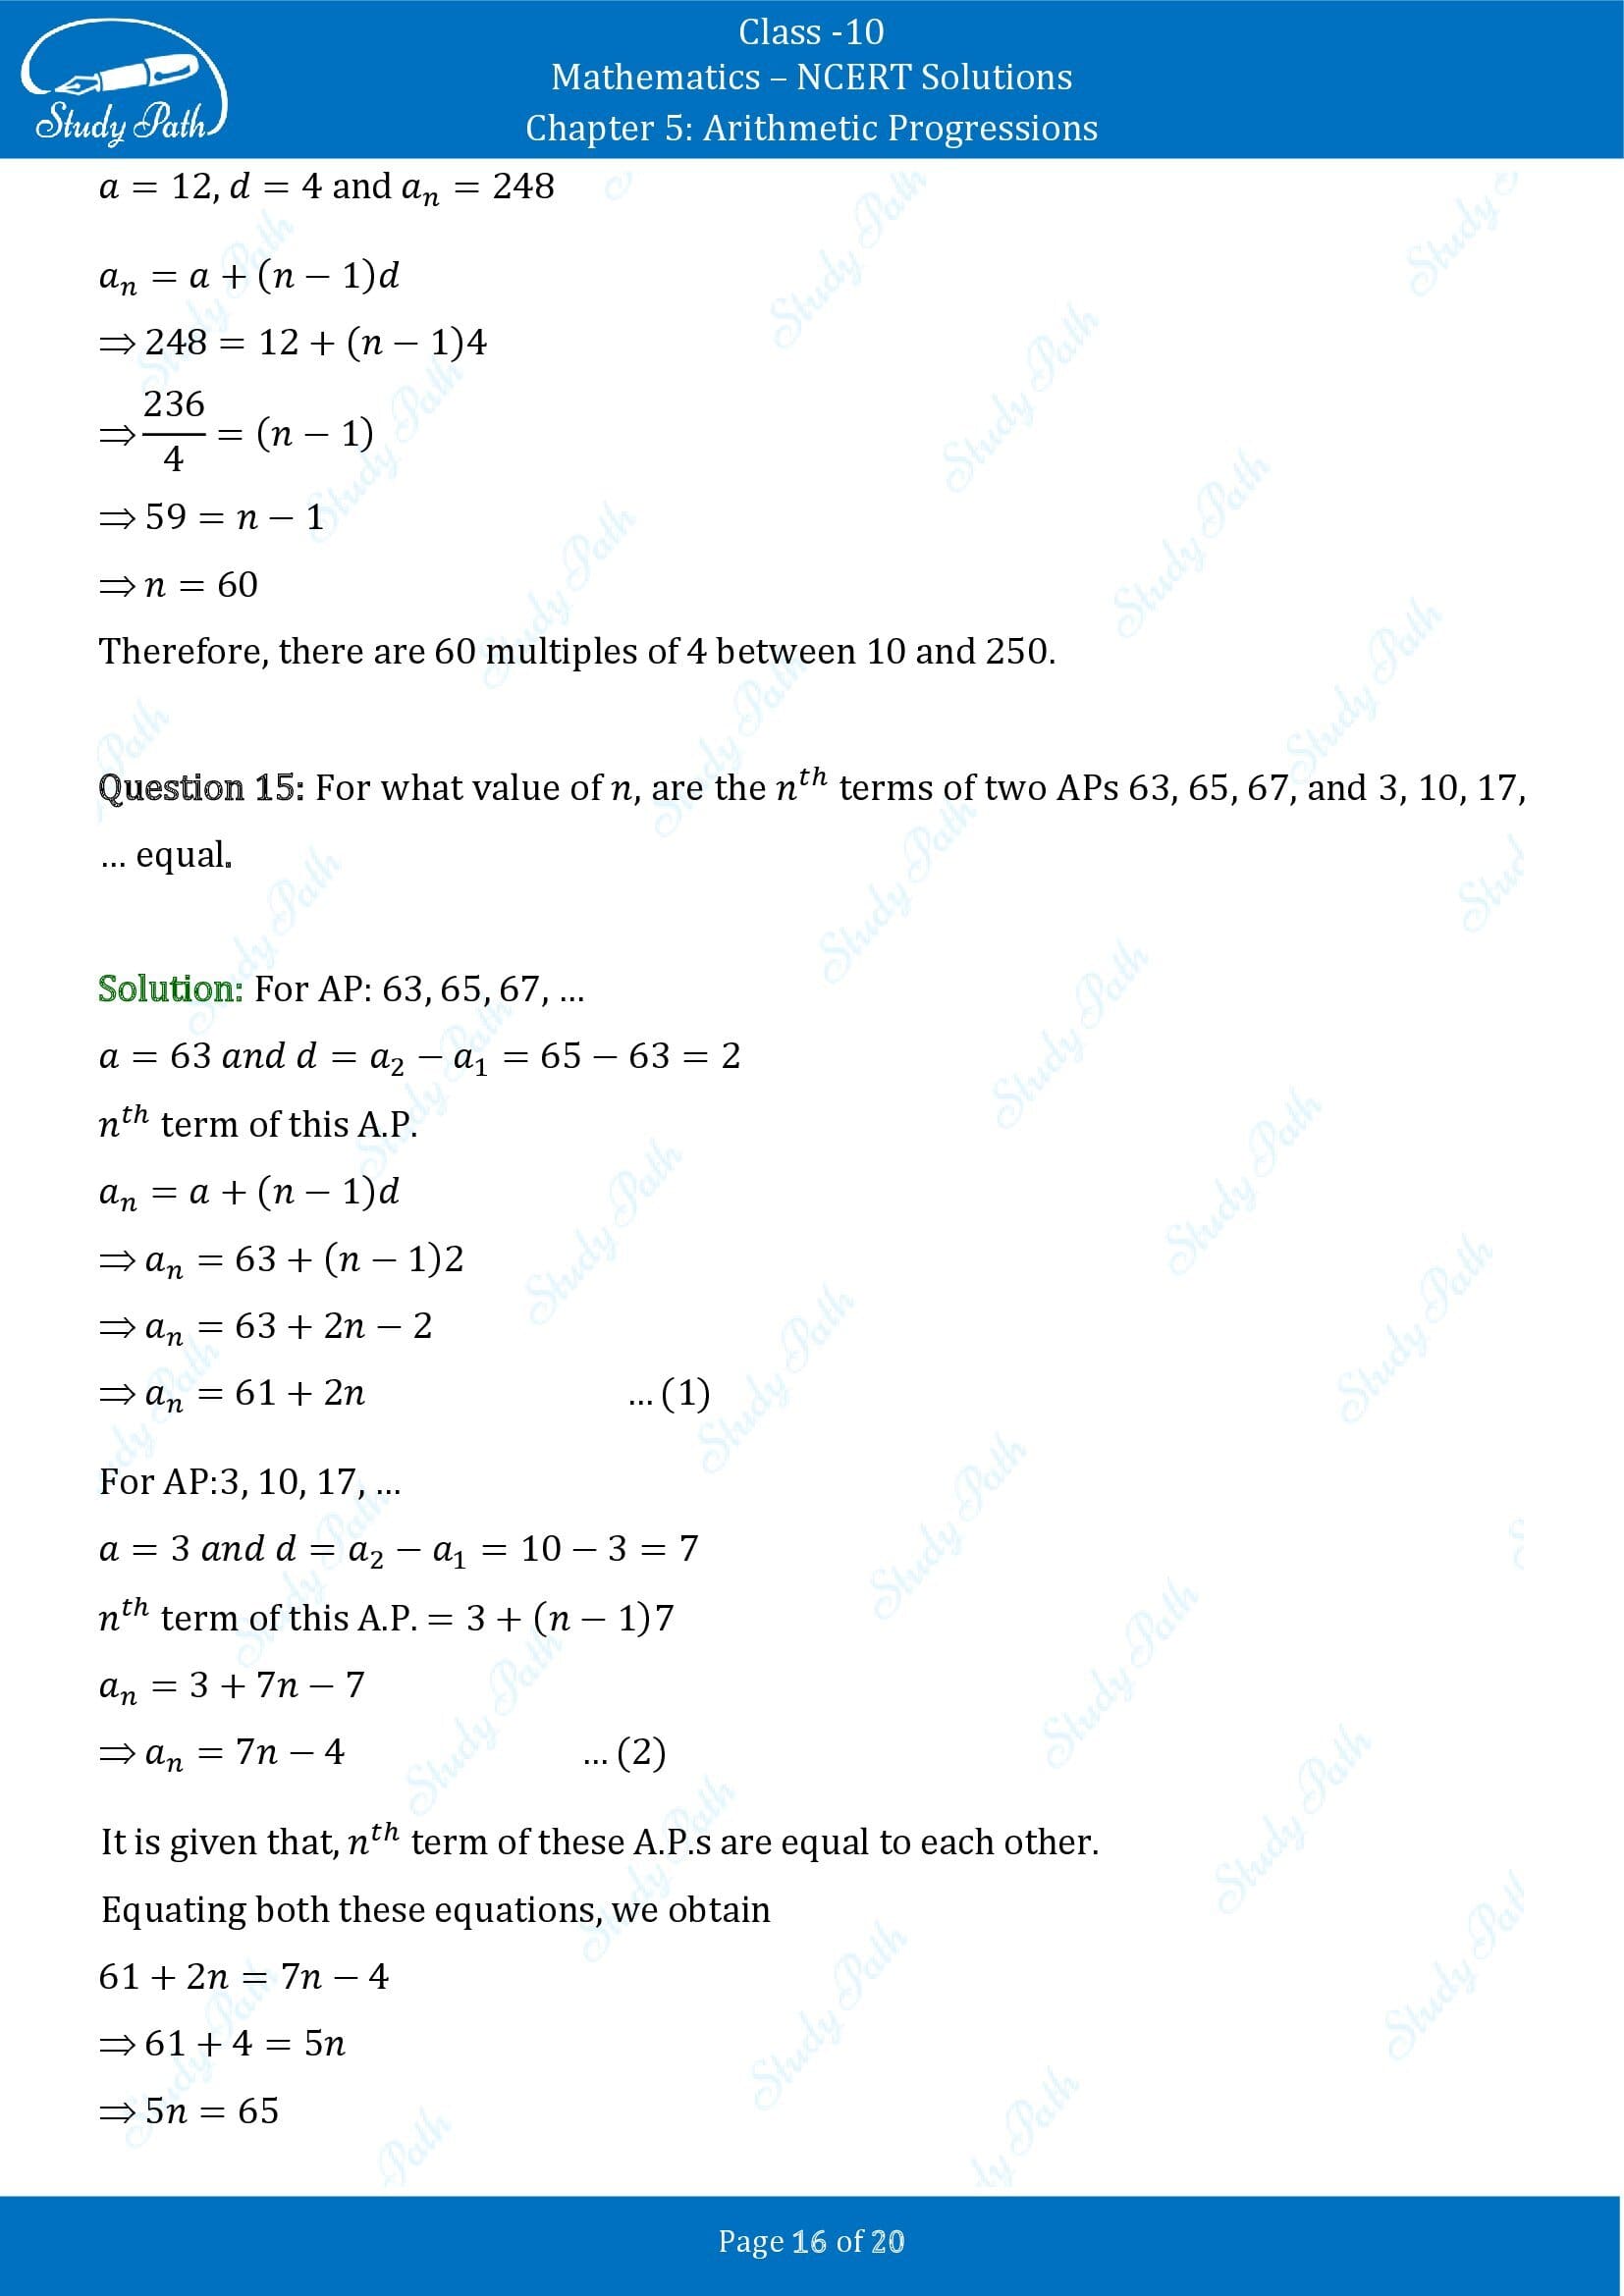 NCERT Solutions for Class 10 Maths Chapter 5 Arithmetic Progressions Exercise 5.2 00016